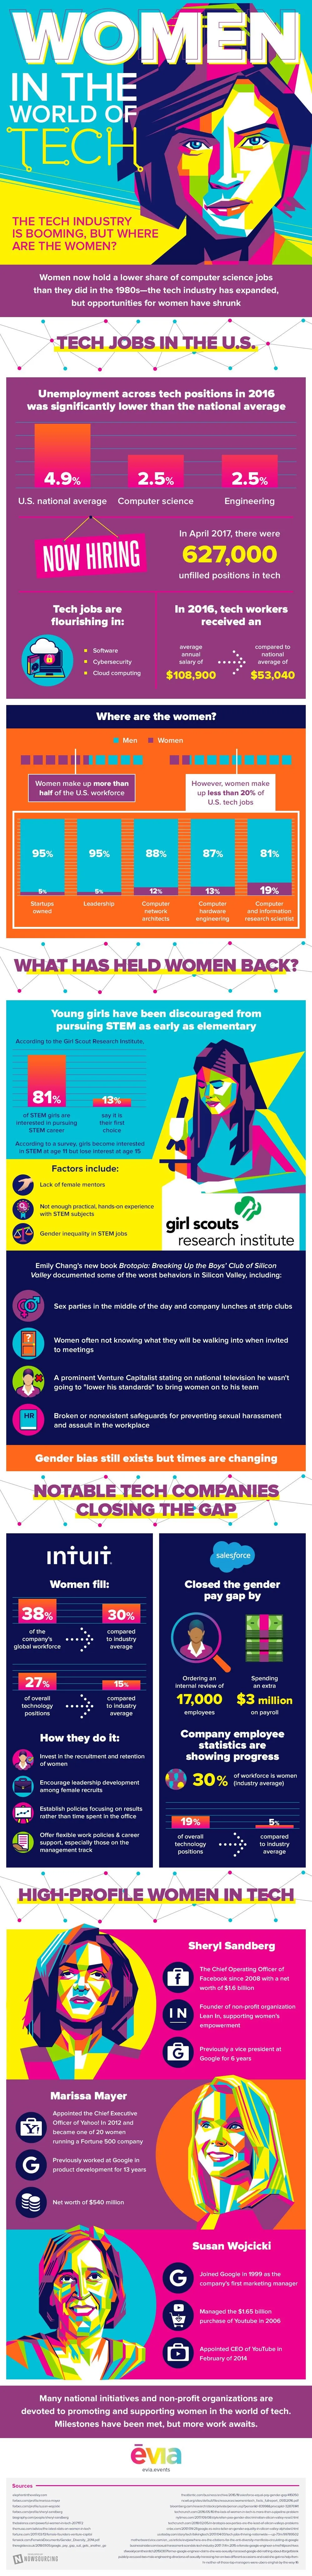 Women in the world of technology: The tech industry is booming, but where are the women? - infographic